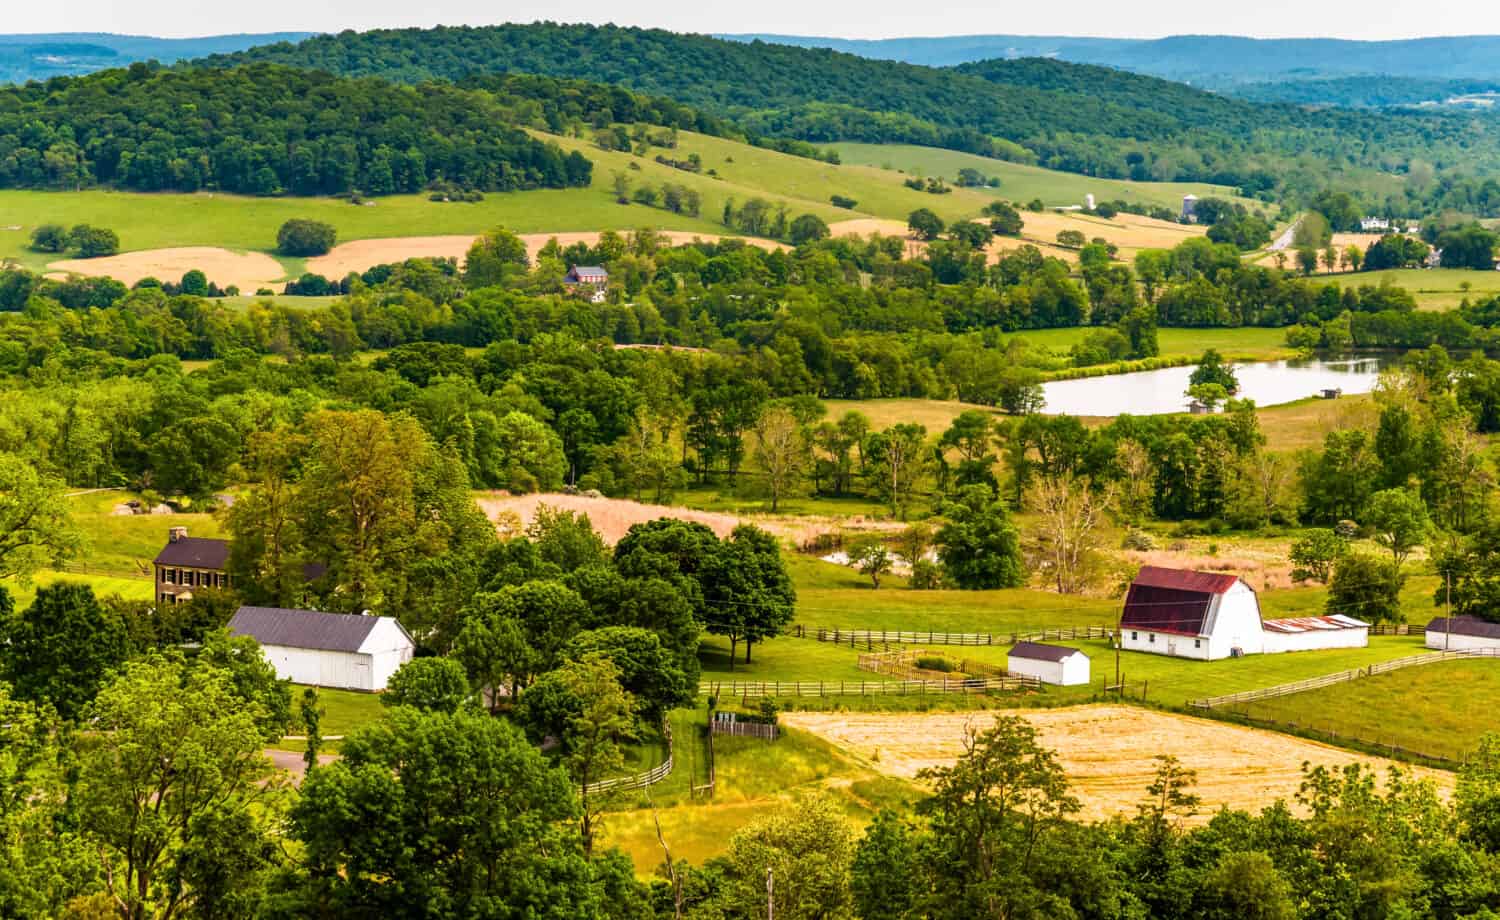 View of hills and farmland in Virginia's Piedmont, seen from Sky Meadows State Park.